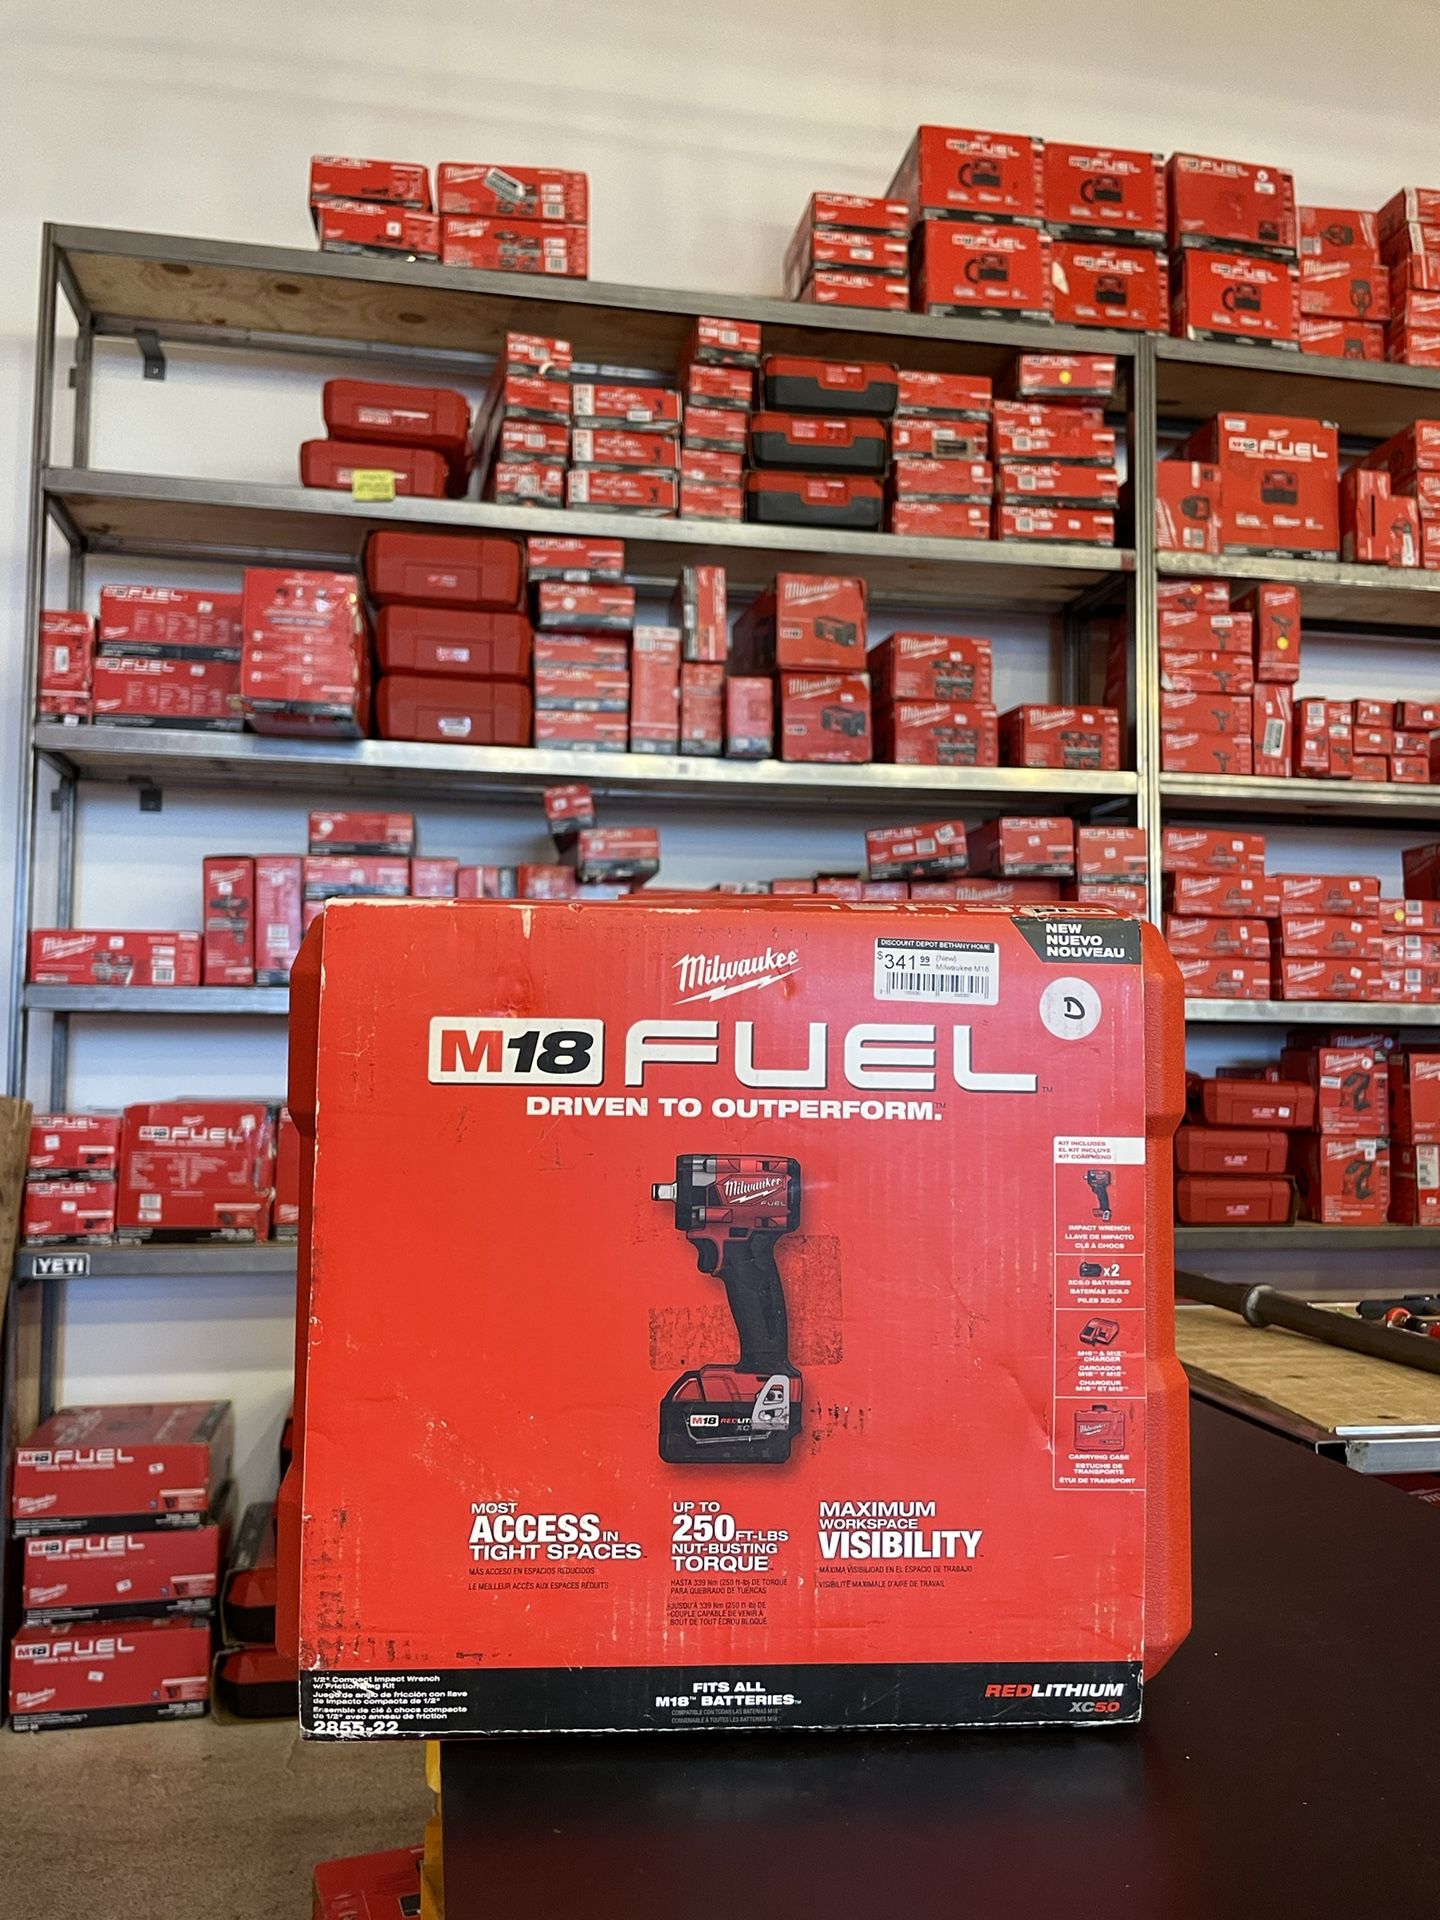 M18 FUEL 18V Lithium-Ion Brushless Cordless 1/2 in. Compact Impact Wrench Kit, Resistant Batteries